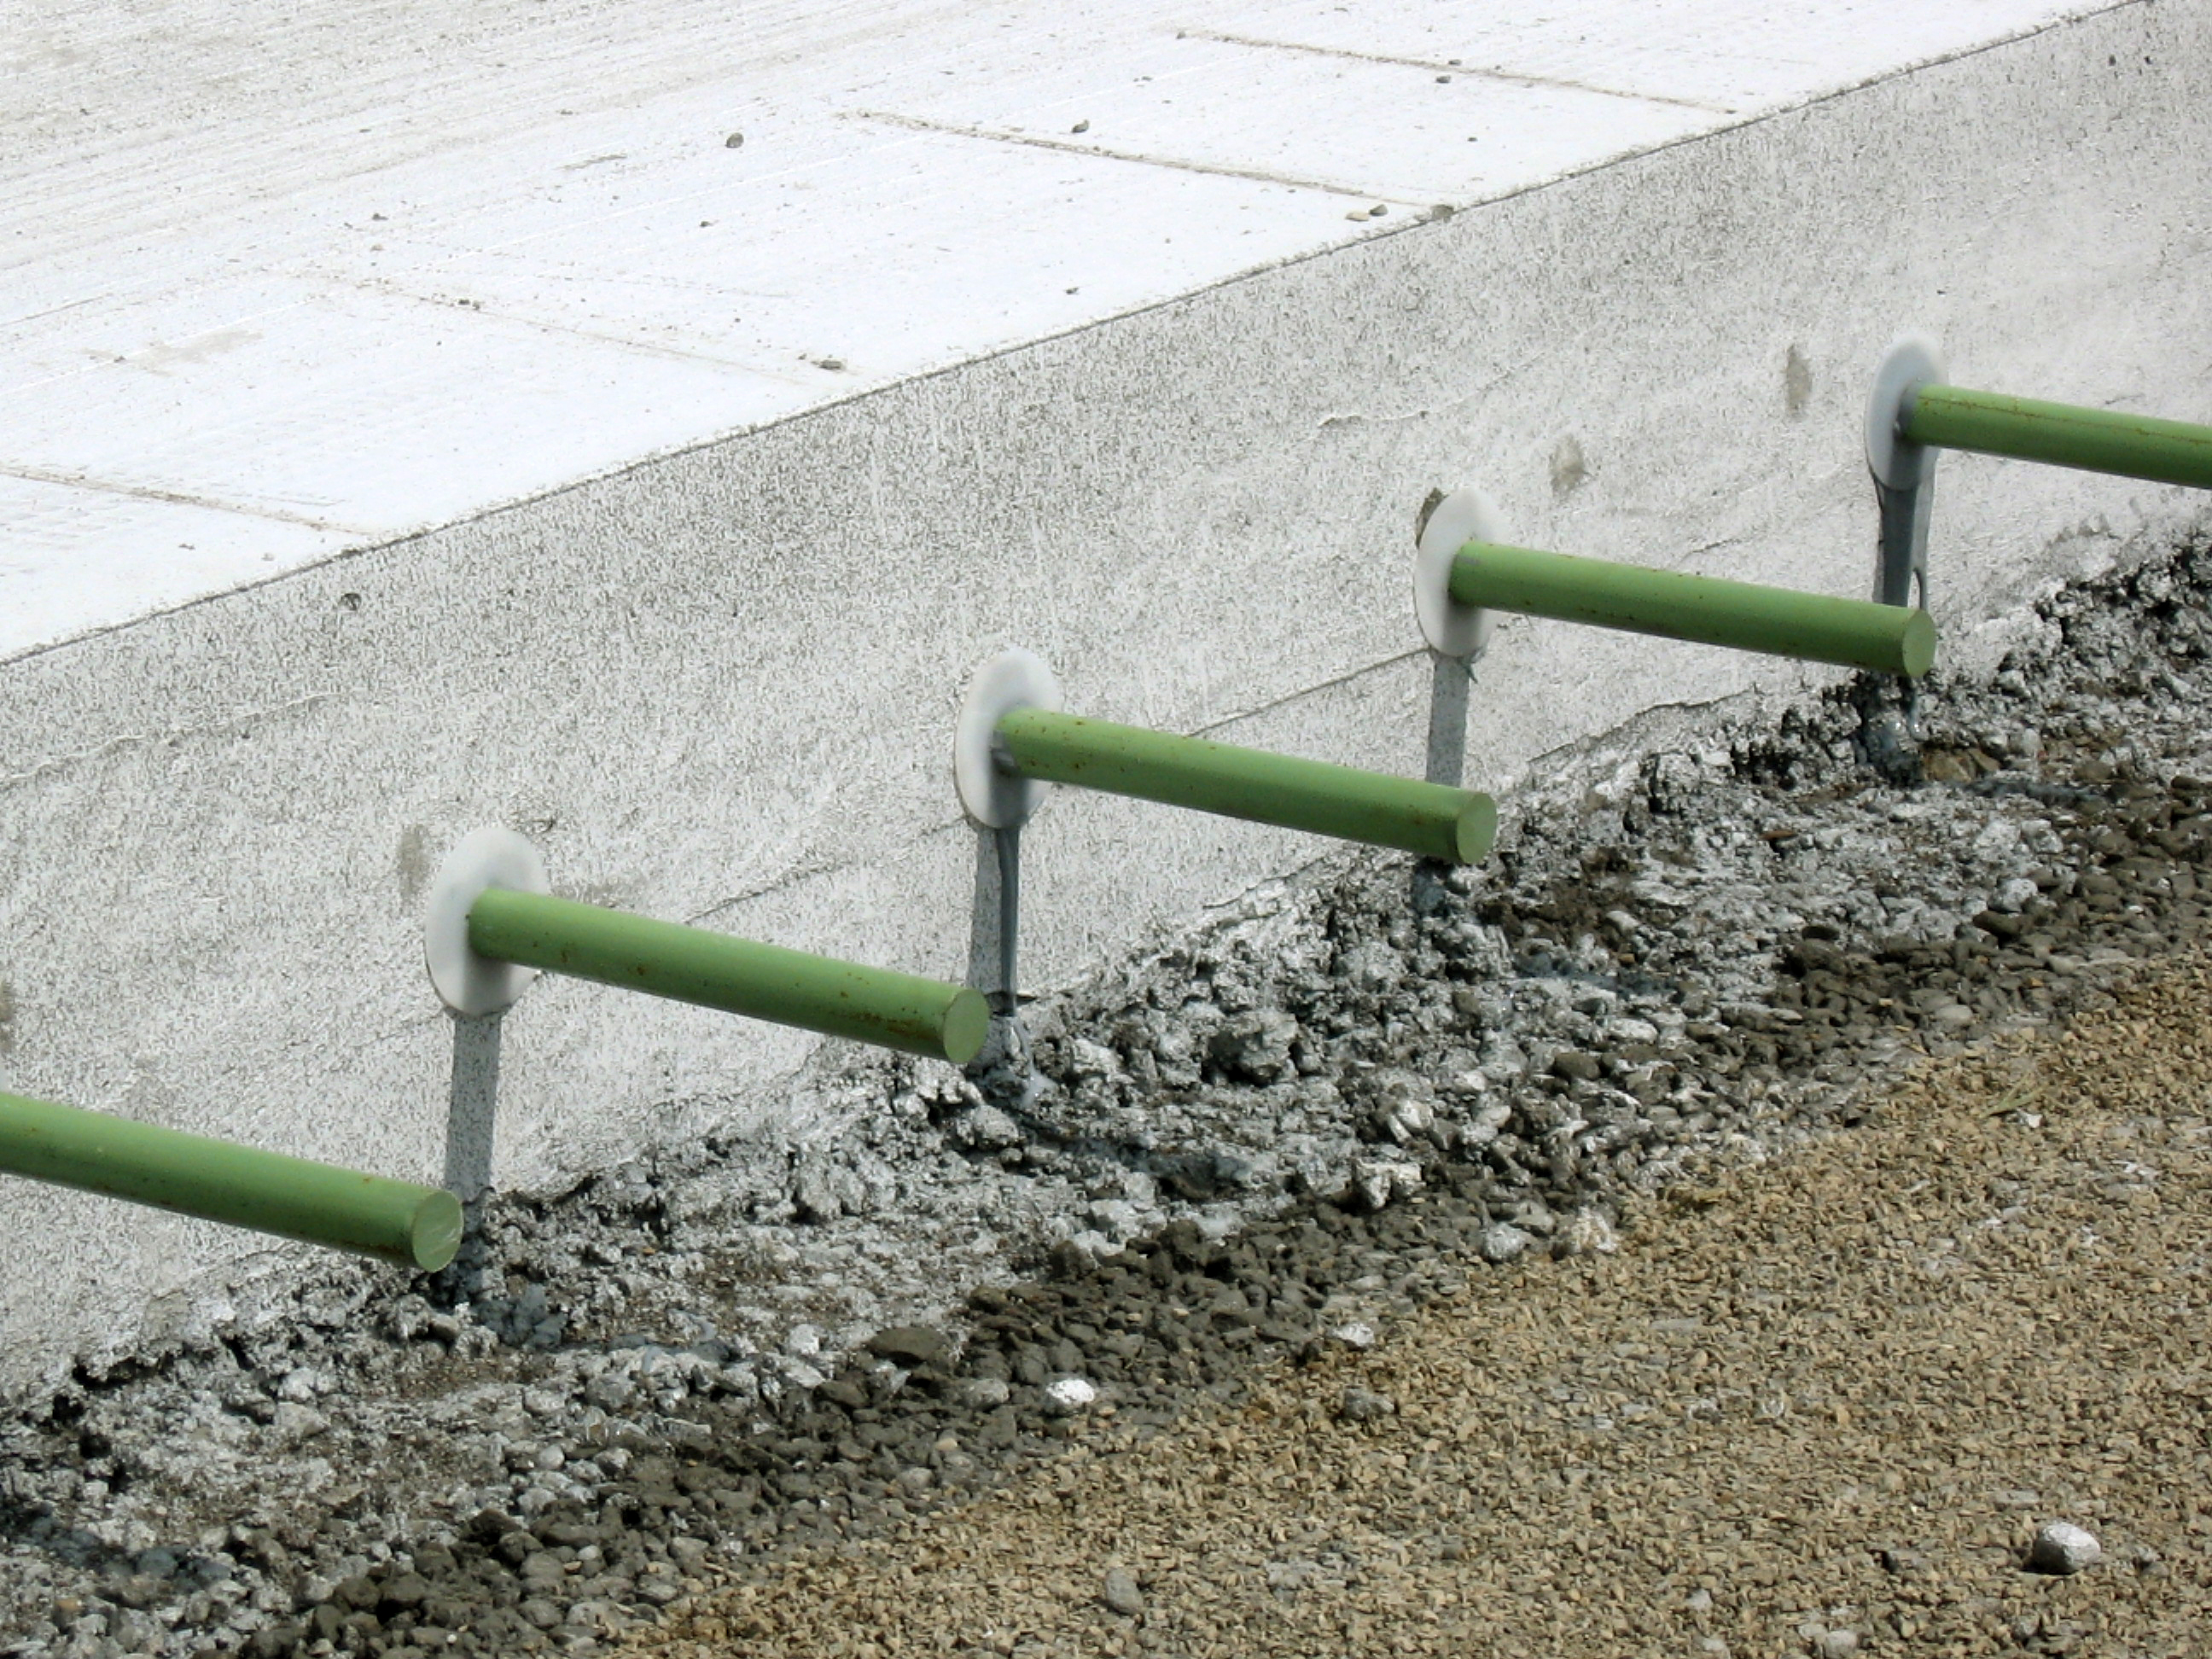 securing anchors into concrete